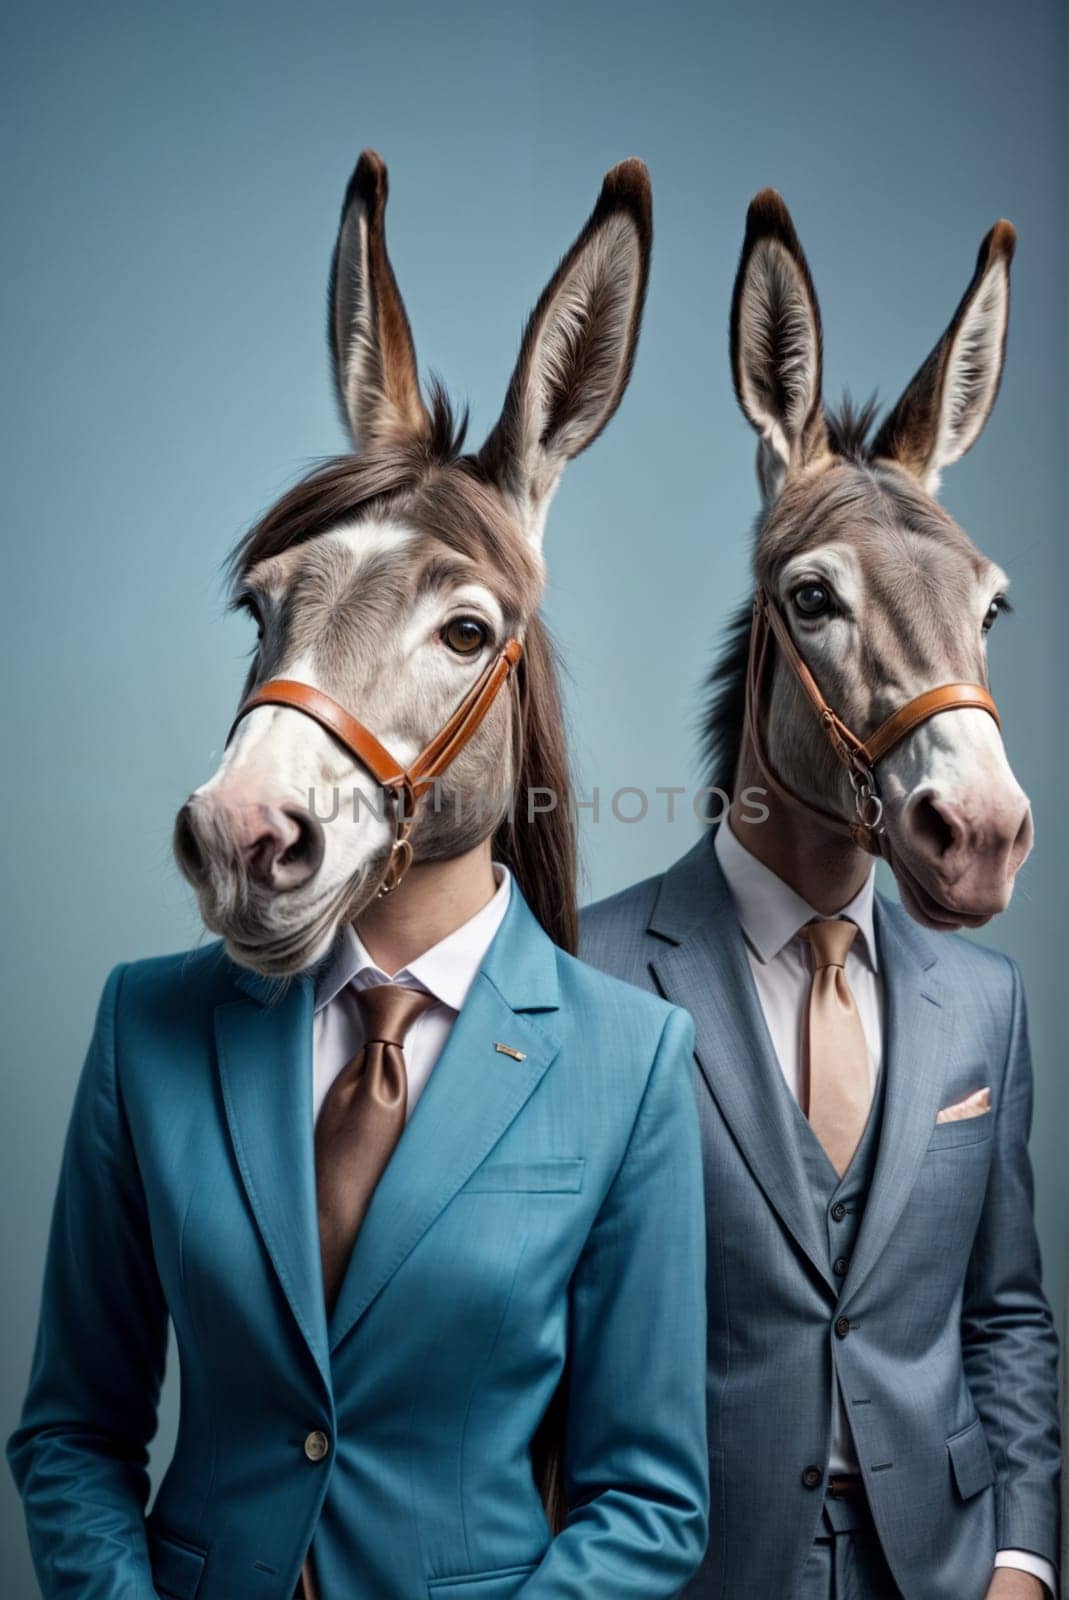 Two anthropomorphic confident donkeys are dressed in formal attire, wearing suits and ties. They are standing next to each other, their expressions appearing calm and stoic. AI generated